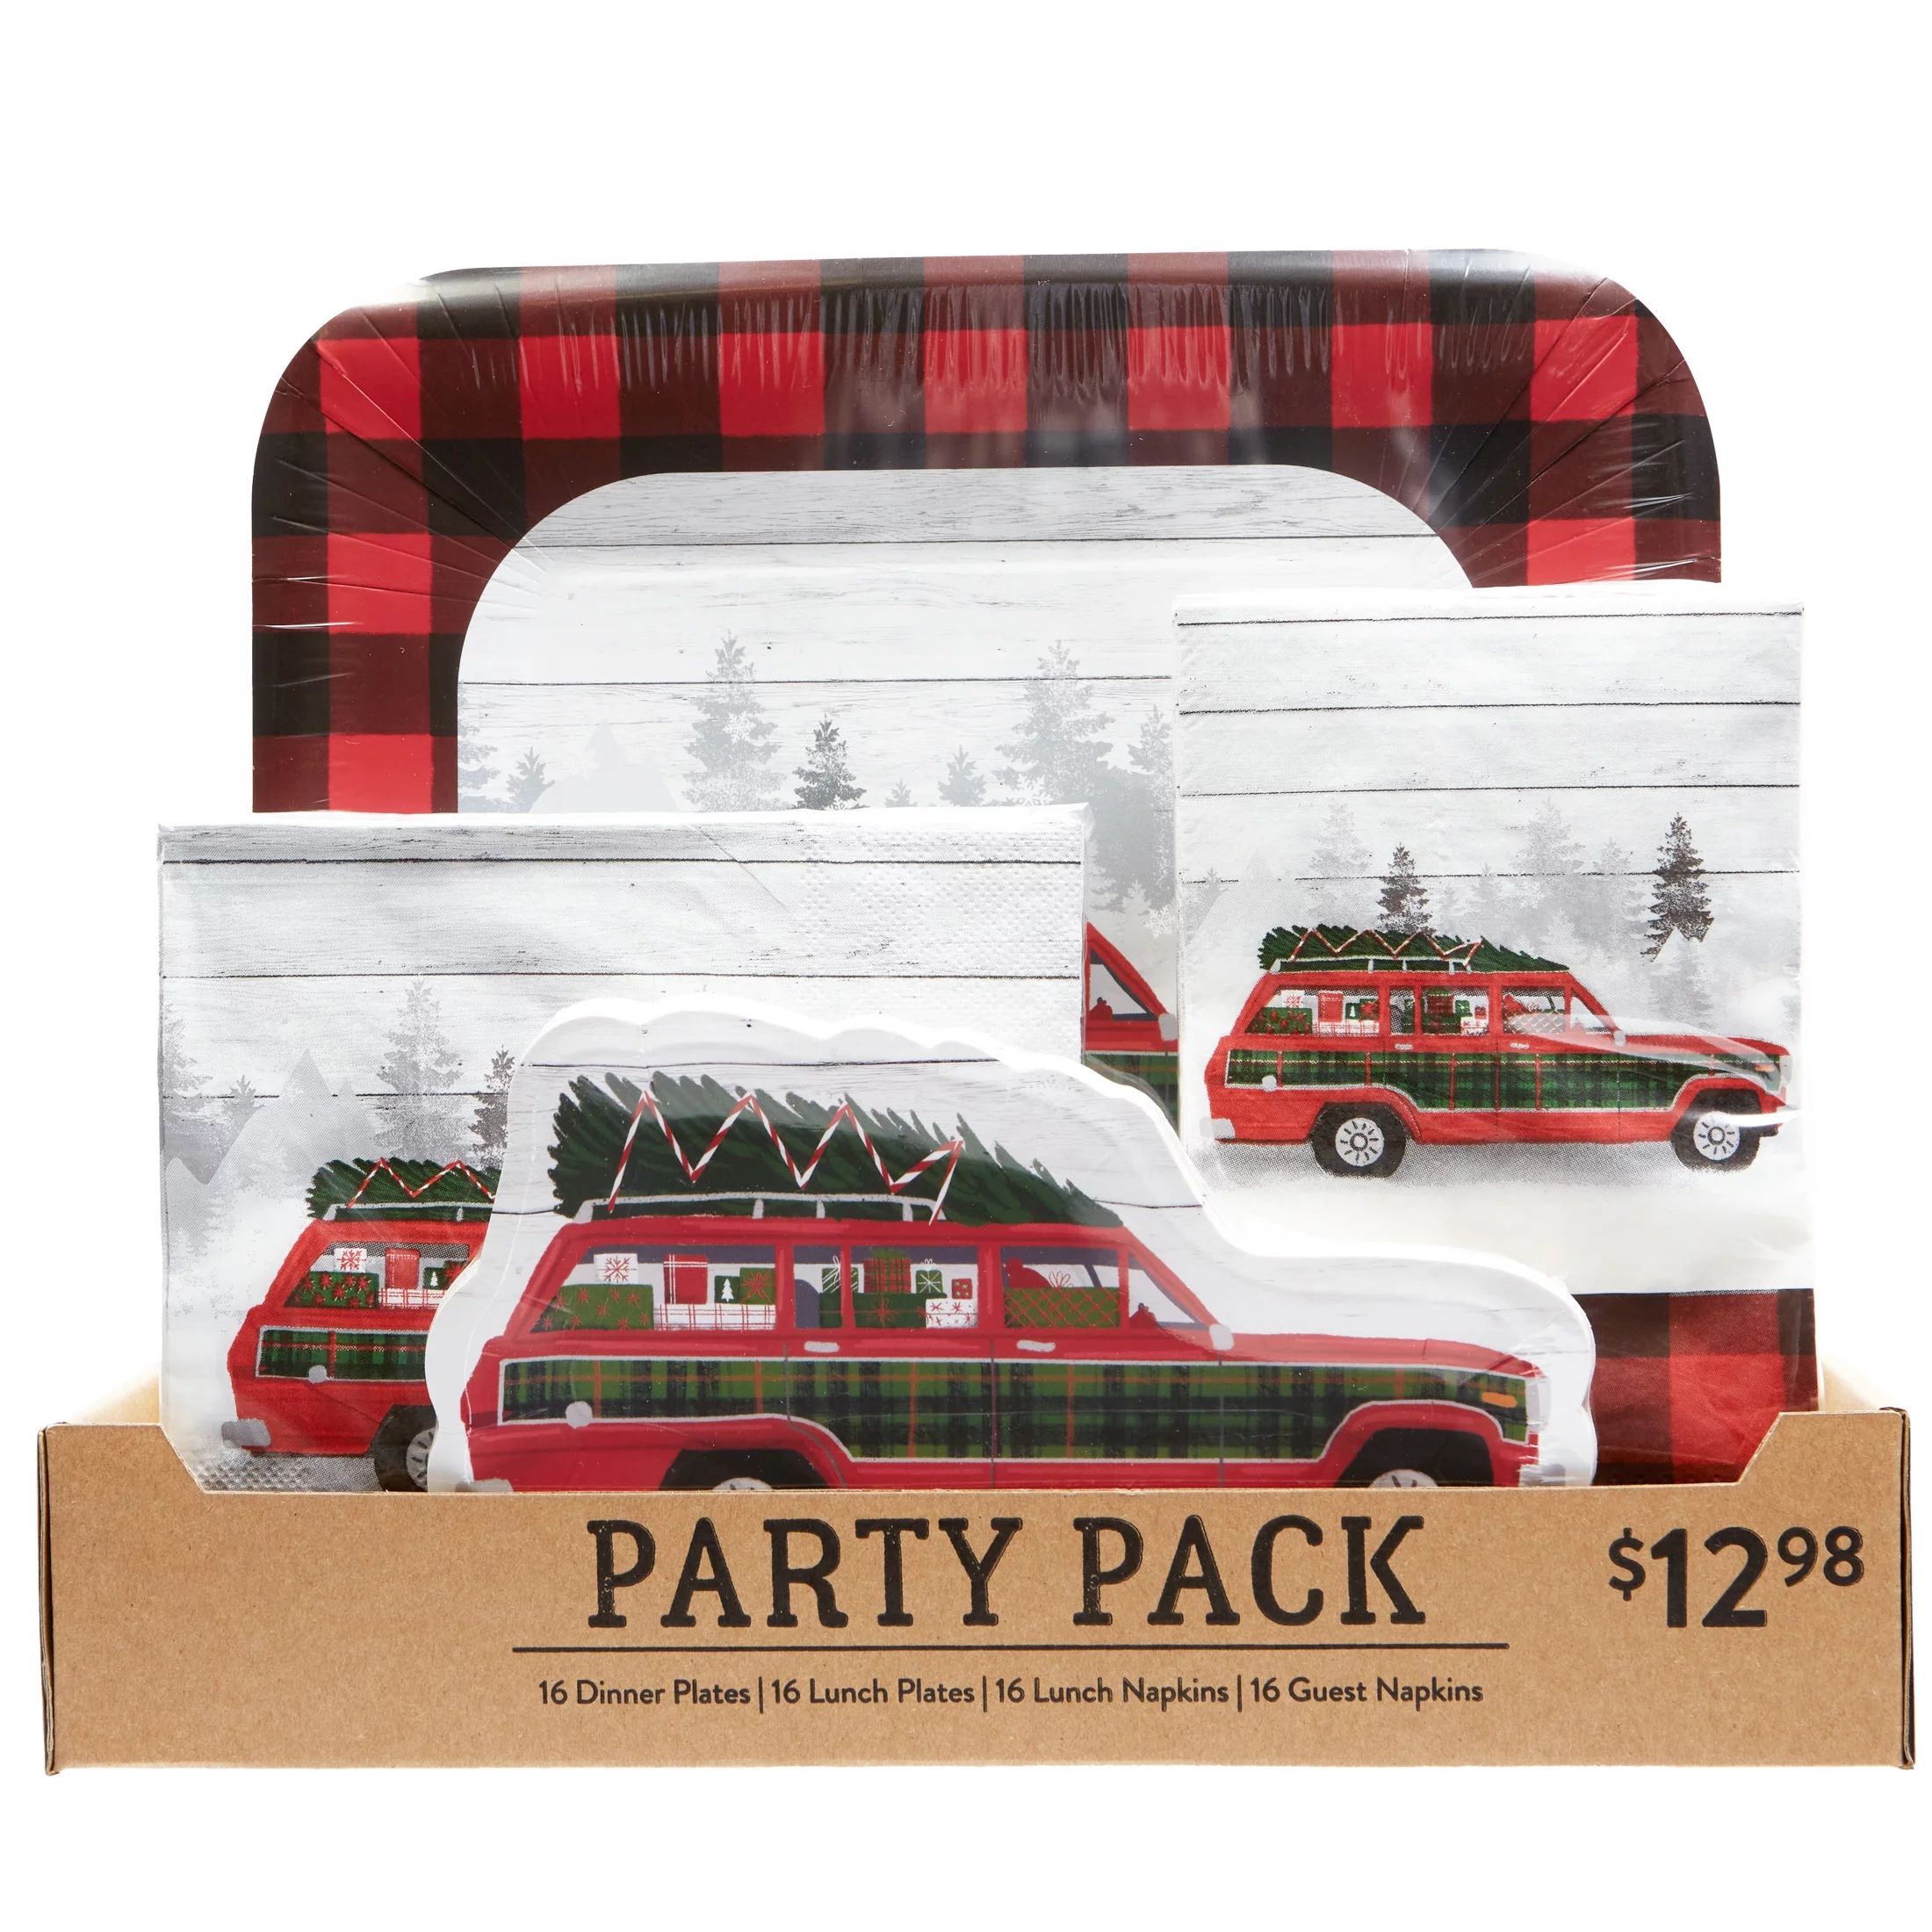 Holiday Time 64 Piece Paper Tableware Party Pack, Plates, Napkins, Happy Holidays, Plaid, Serves ... | Walmart (US)